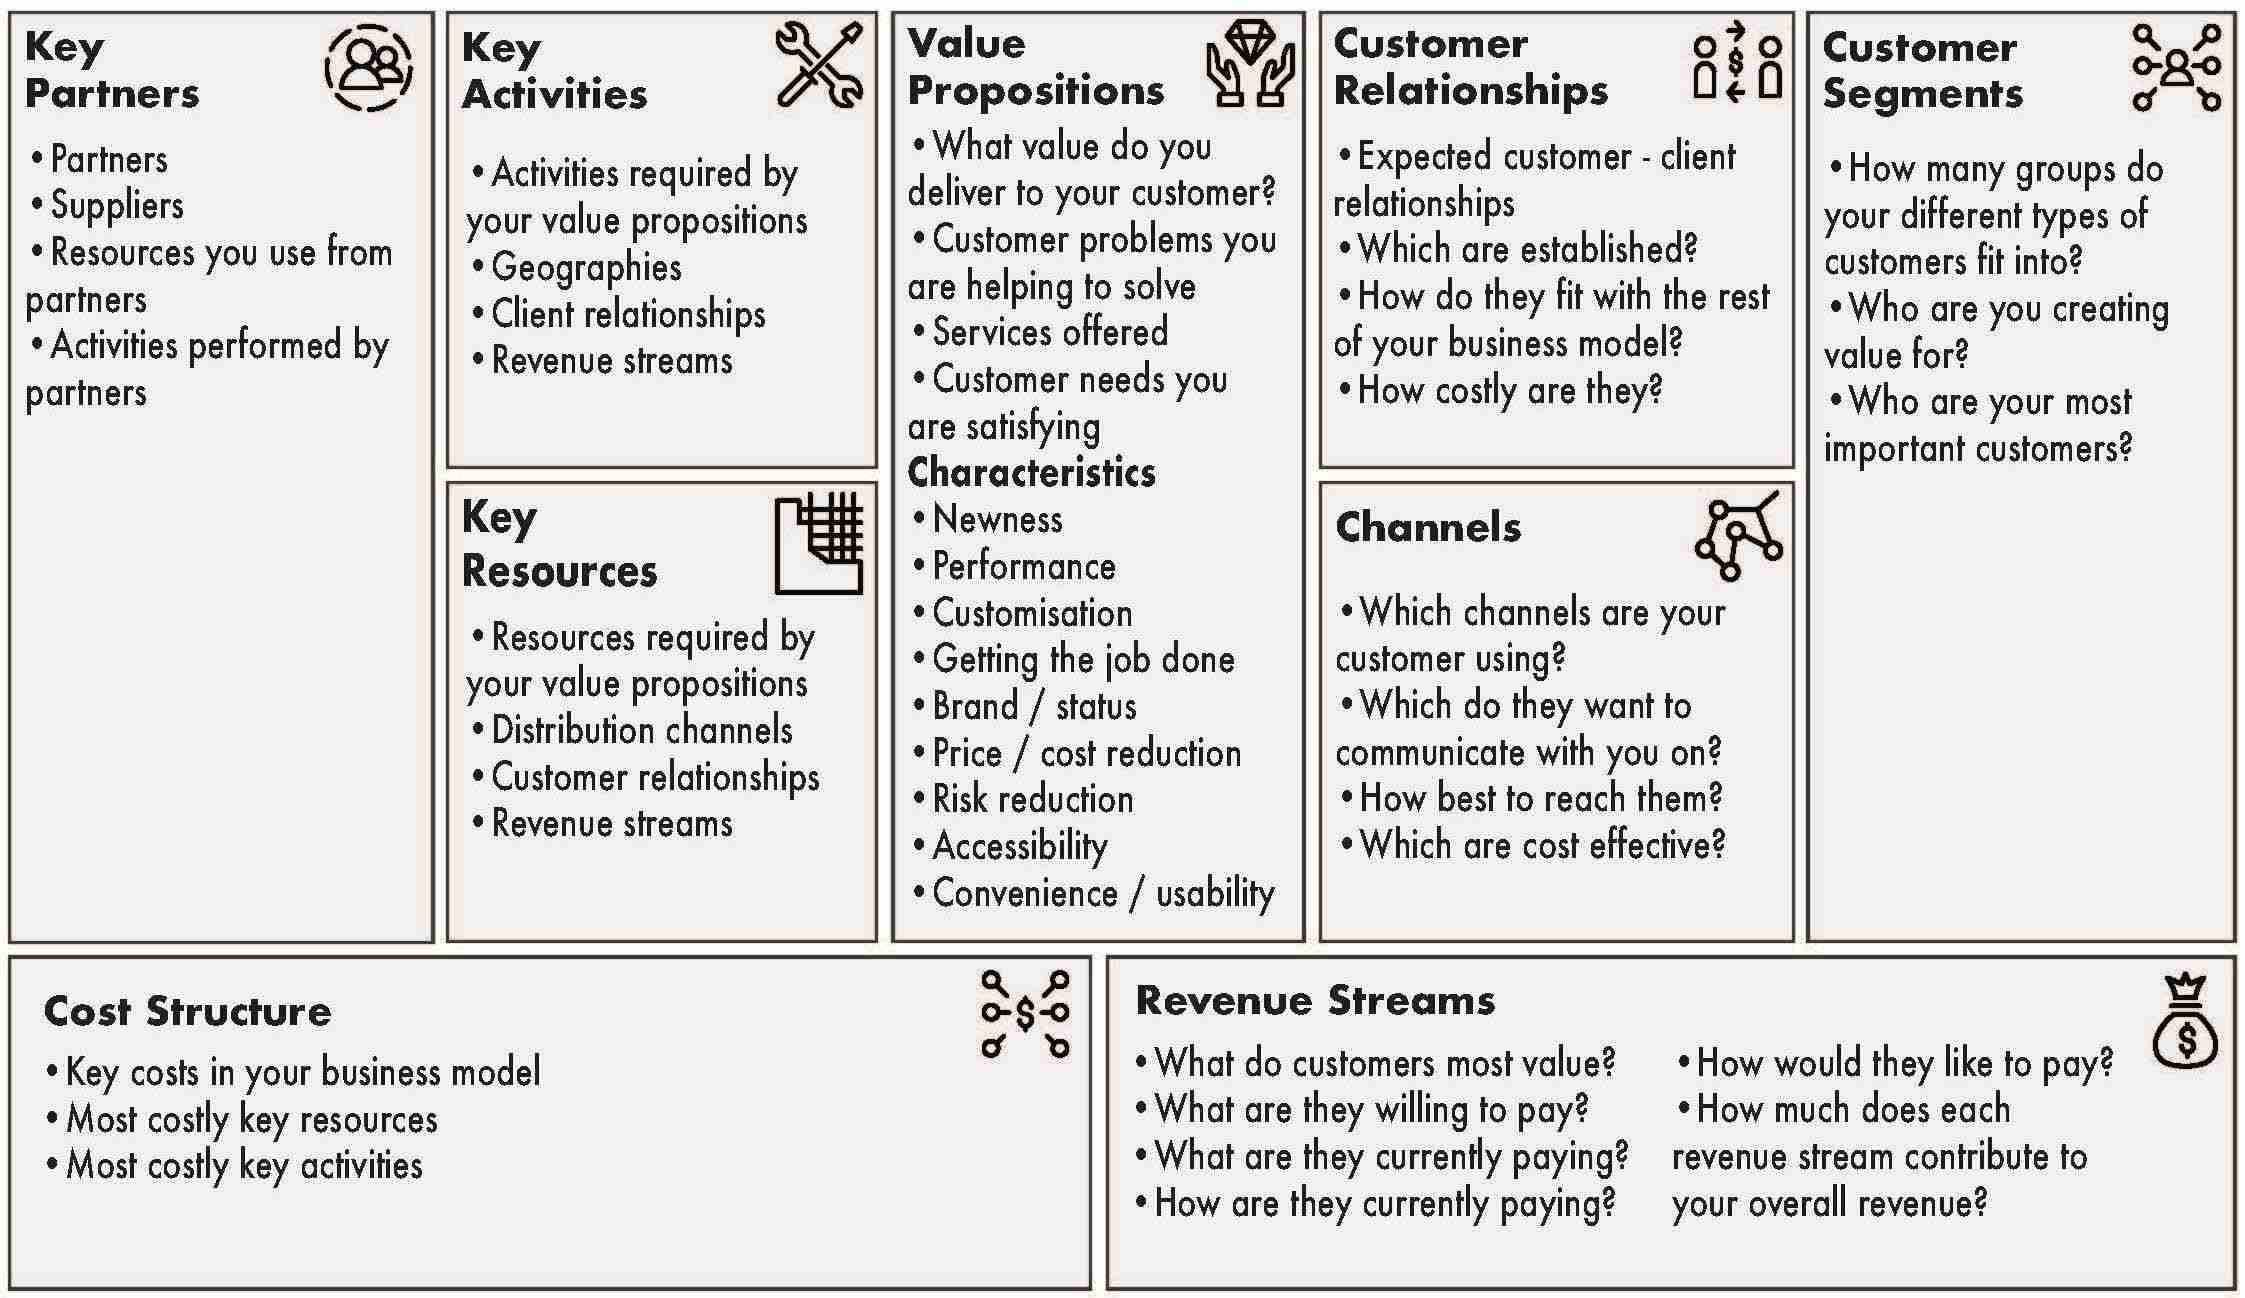 This image shows an example of a completed Free Business Model Canvas Template